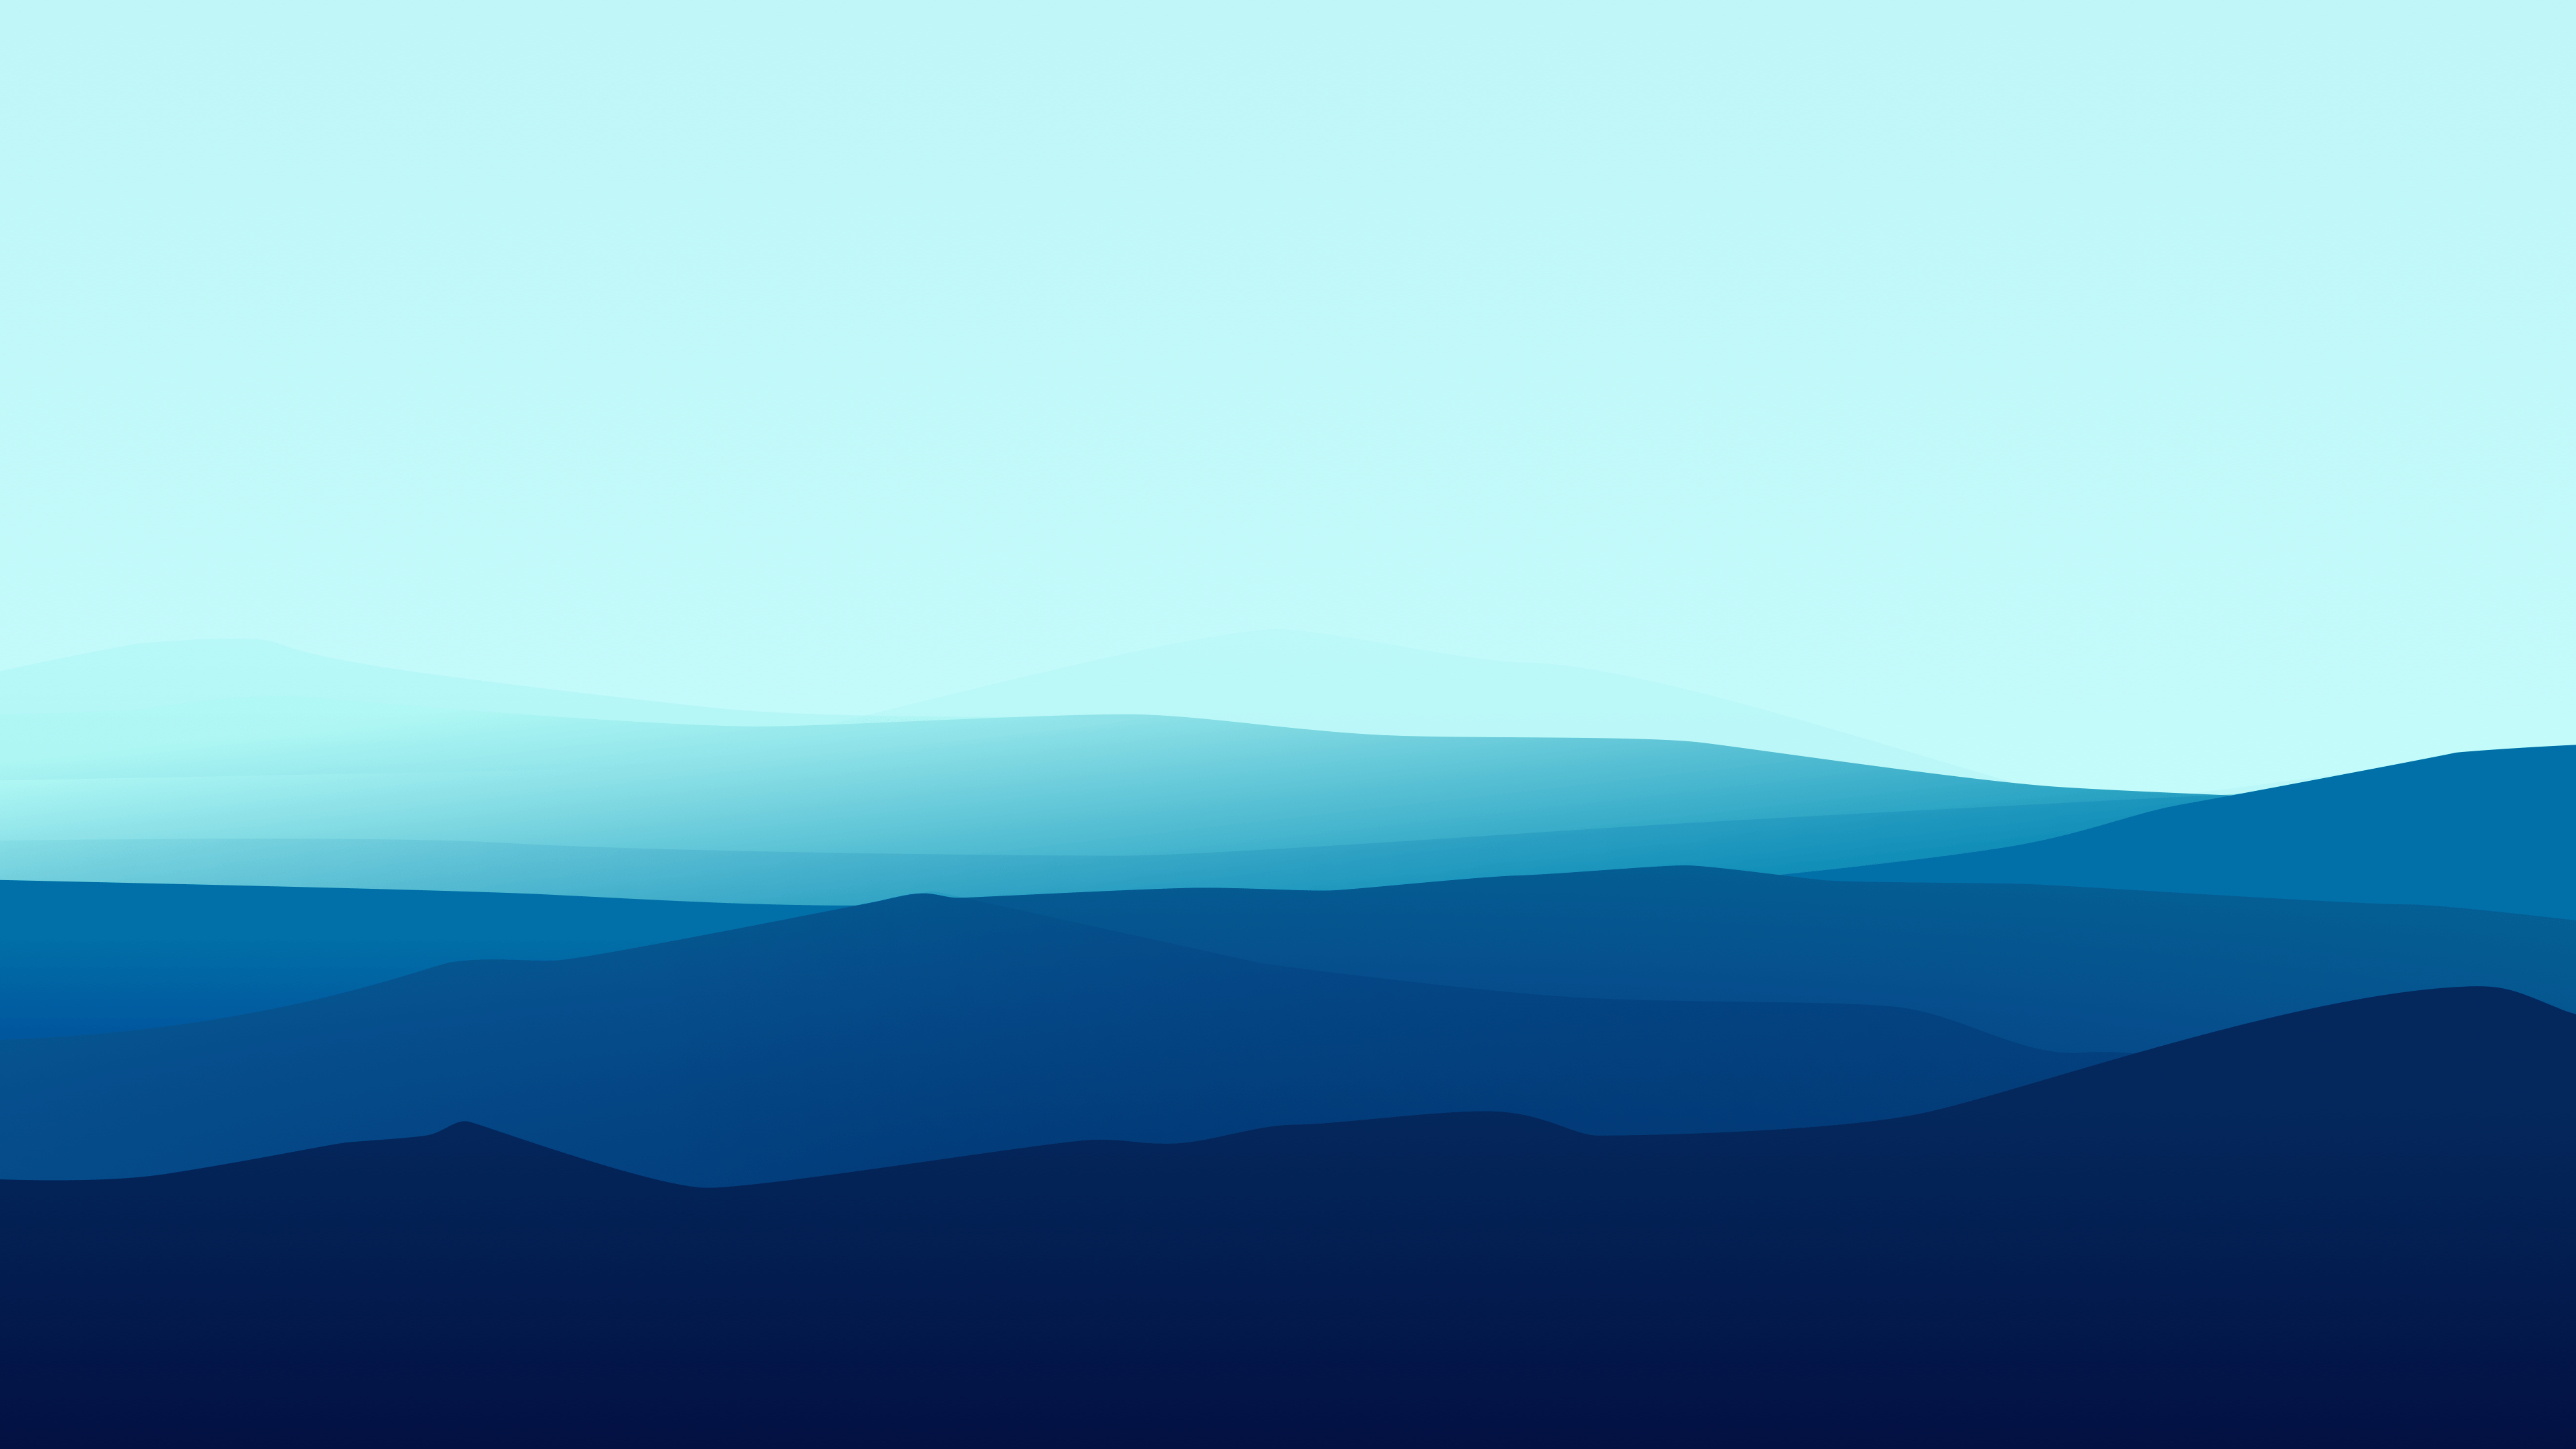 Minimalist QHD Wallpaper for your PC or MacBook